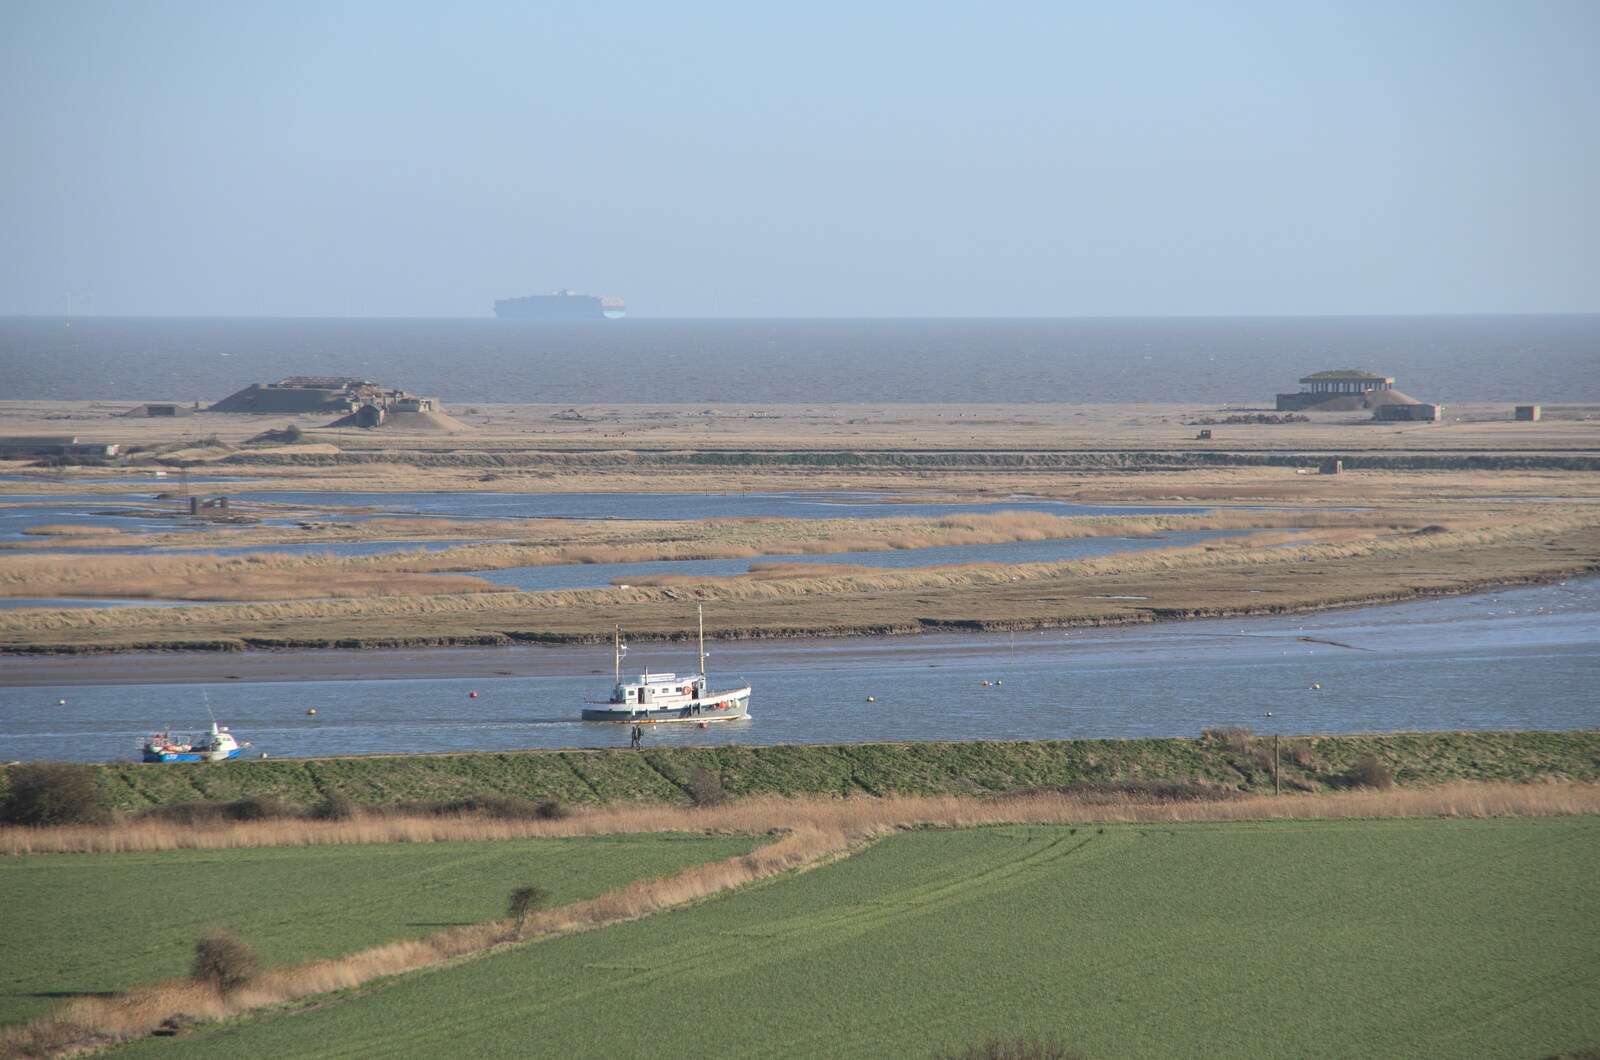 The MV Lady Florence heads out on a cruise from A Trip to Orford Castle, Orford, Suffolk - 26th February 2022